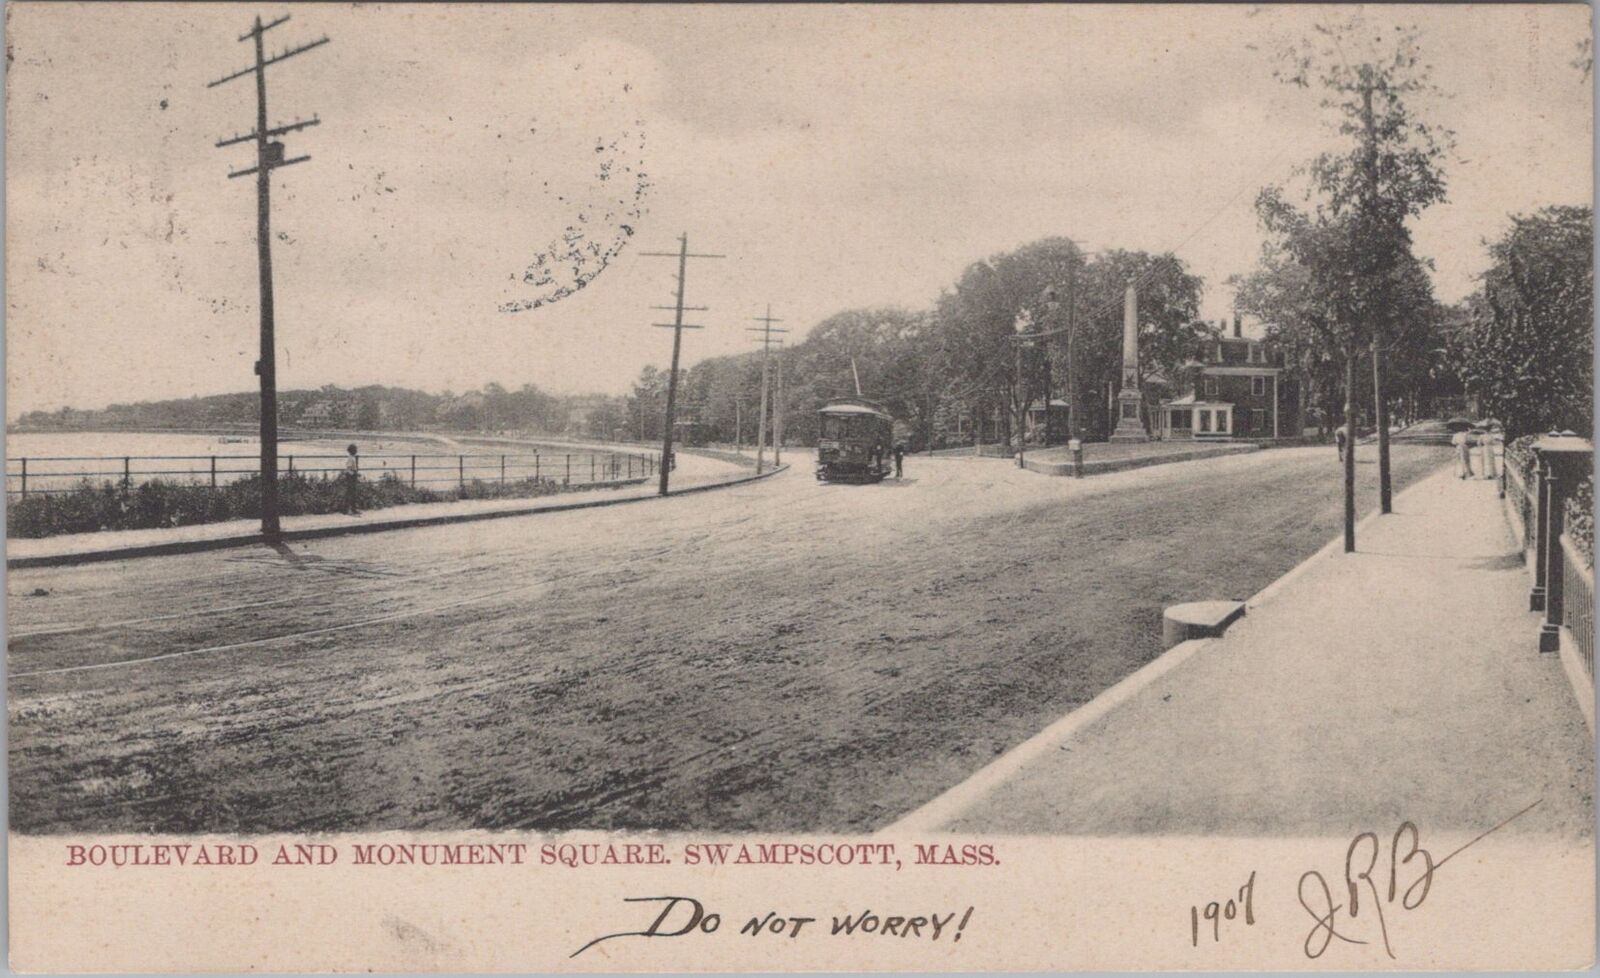 Boulevard and Monument Square Swampscott Mass Trolley Streetcar 1907 Postcard